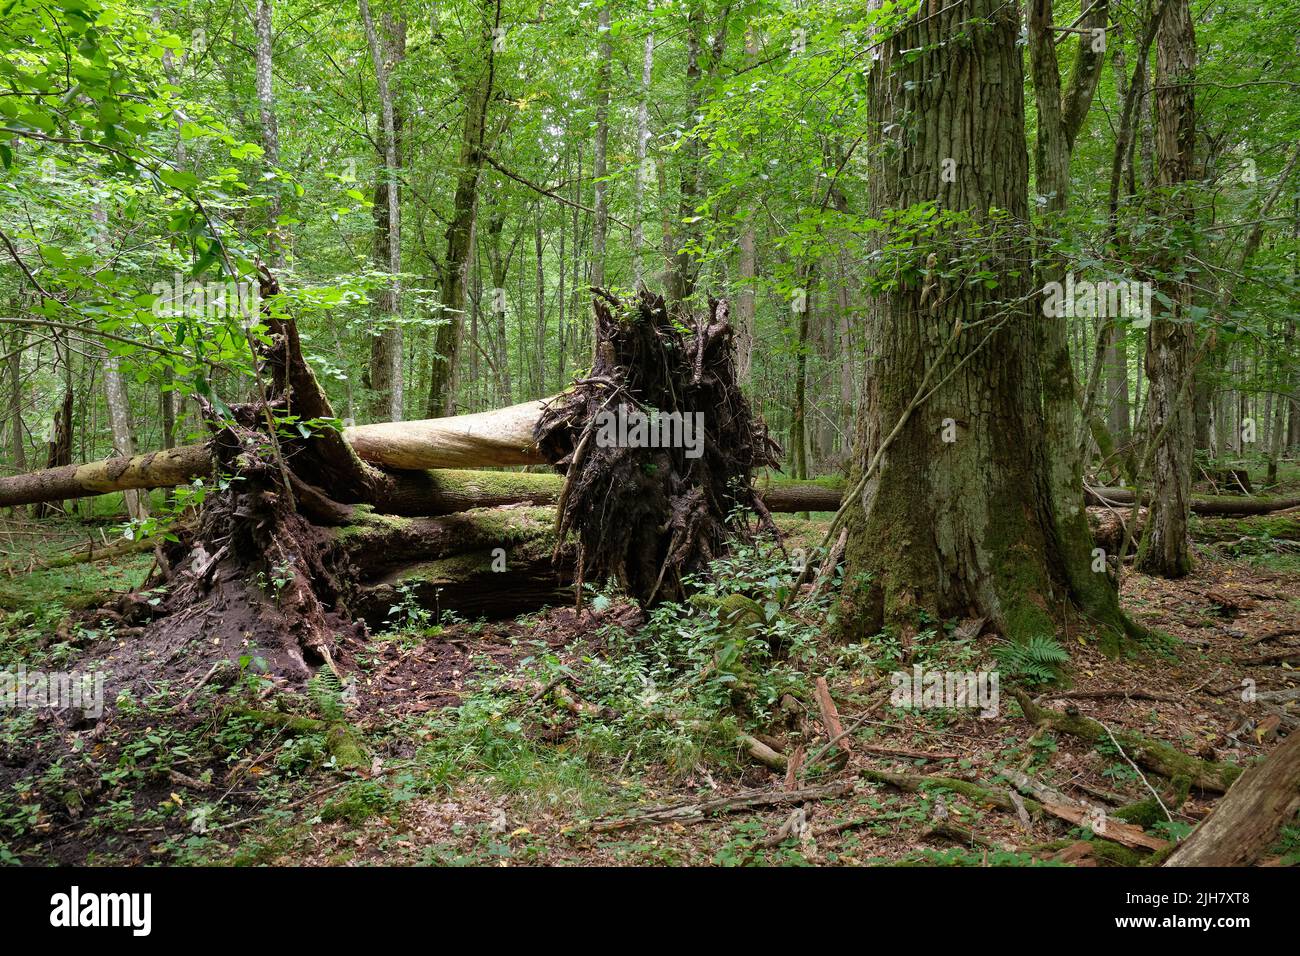 Broken old spruce tree with roots above lying among plants in summertime deciduous tree stand, Bialowieza Forest, Poland, Europe Stock Photo